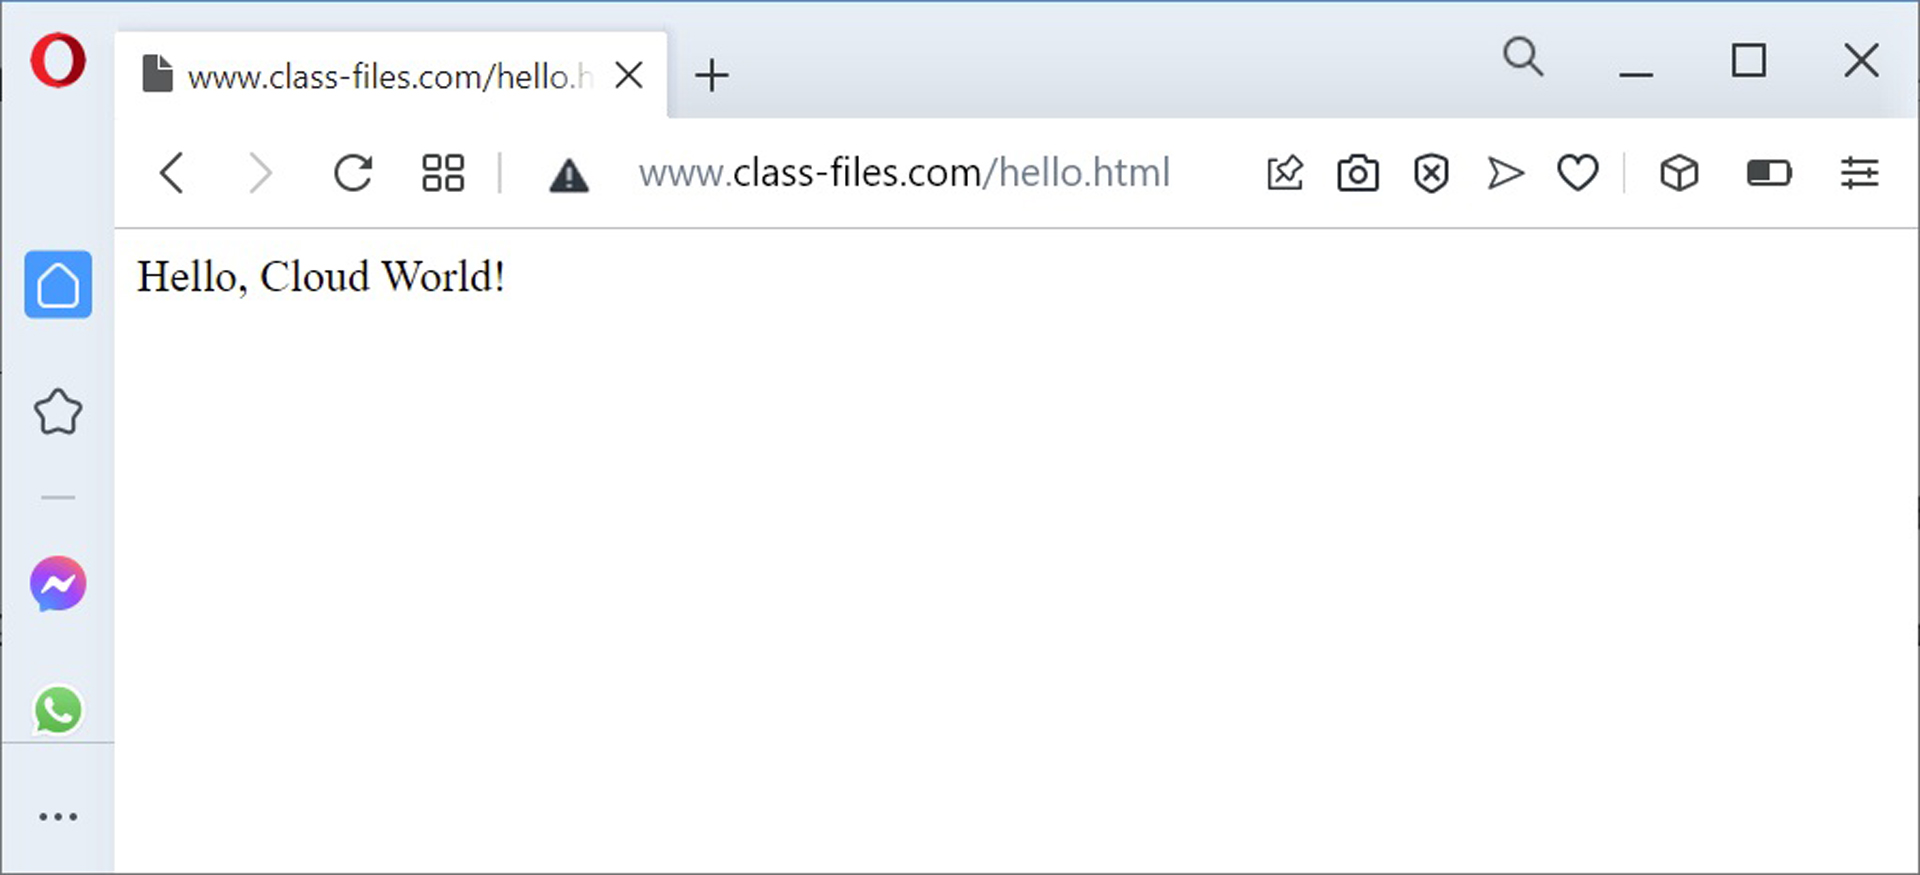 A screenshot displays the address bar of the browser as w w w dot class hyphen files dot com slash hello dot h t m l. Hello comma Cloud World exclamation is shown in the content pane.
